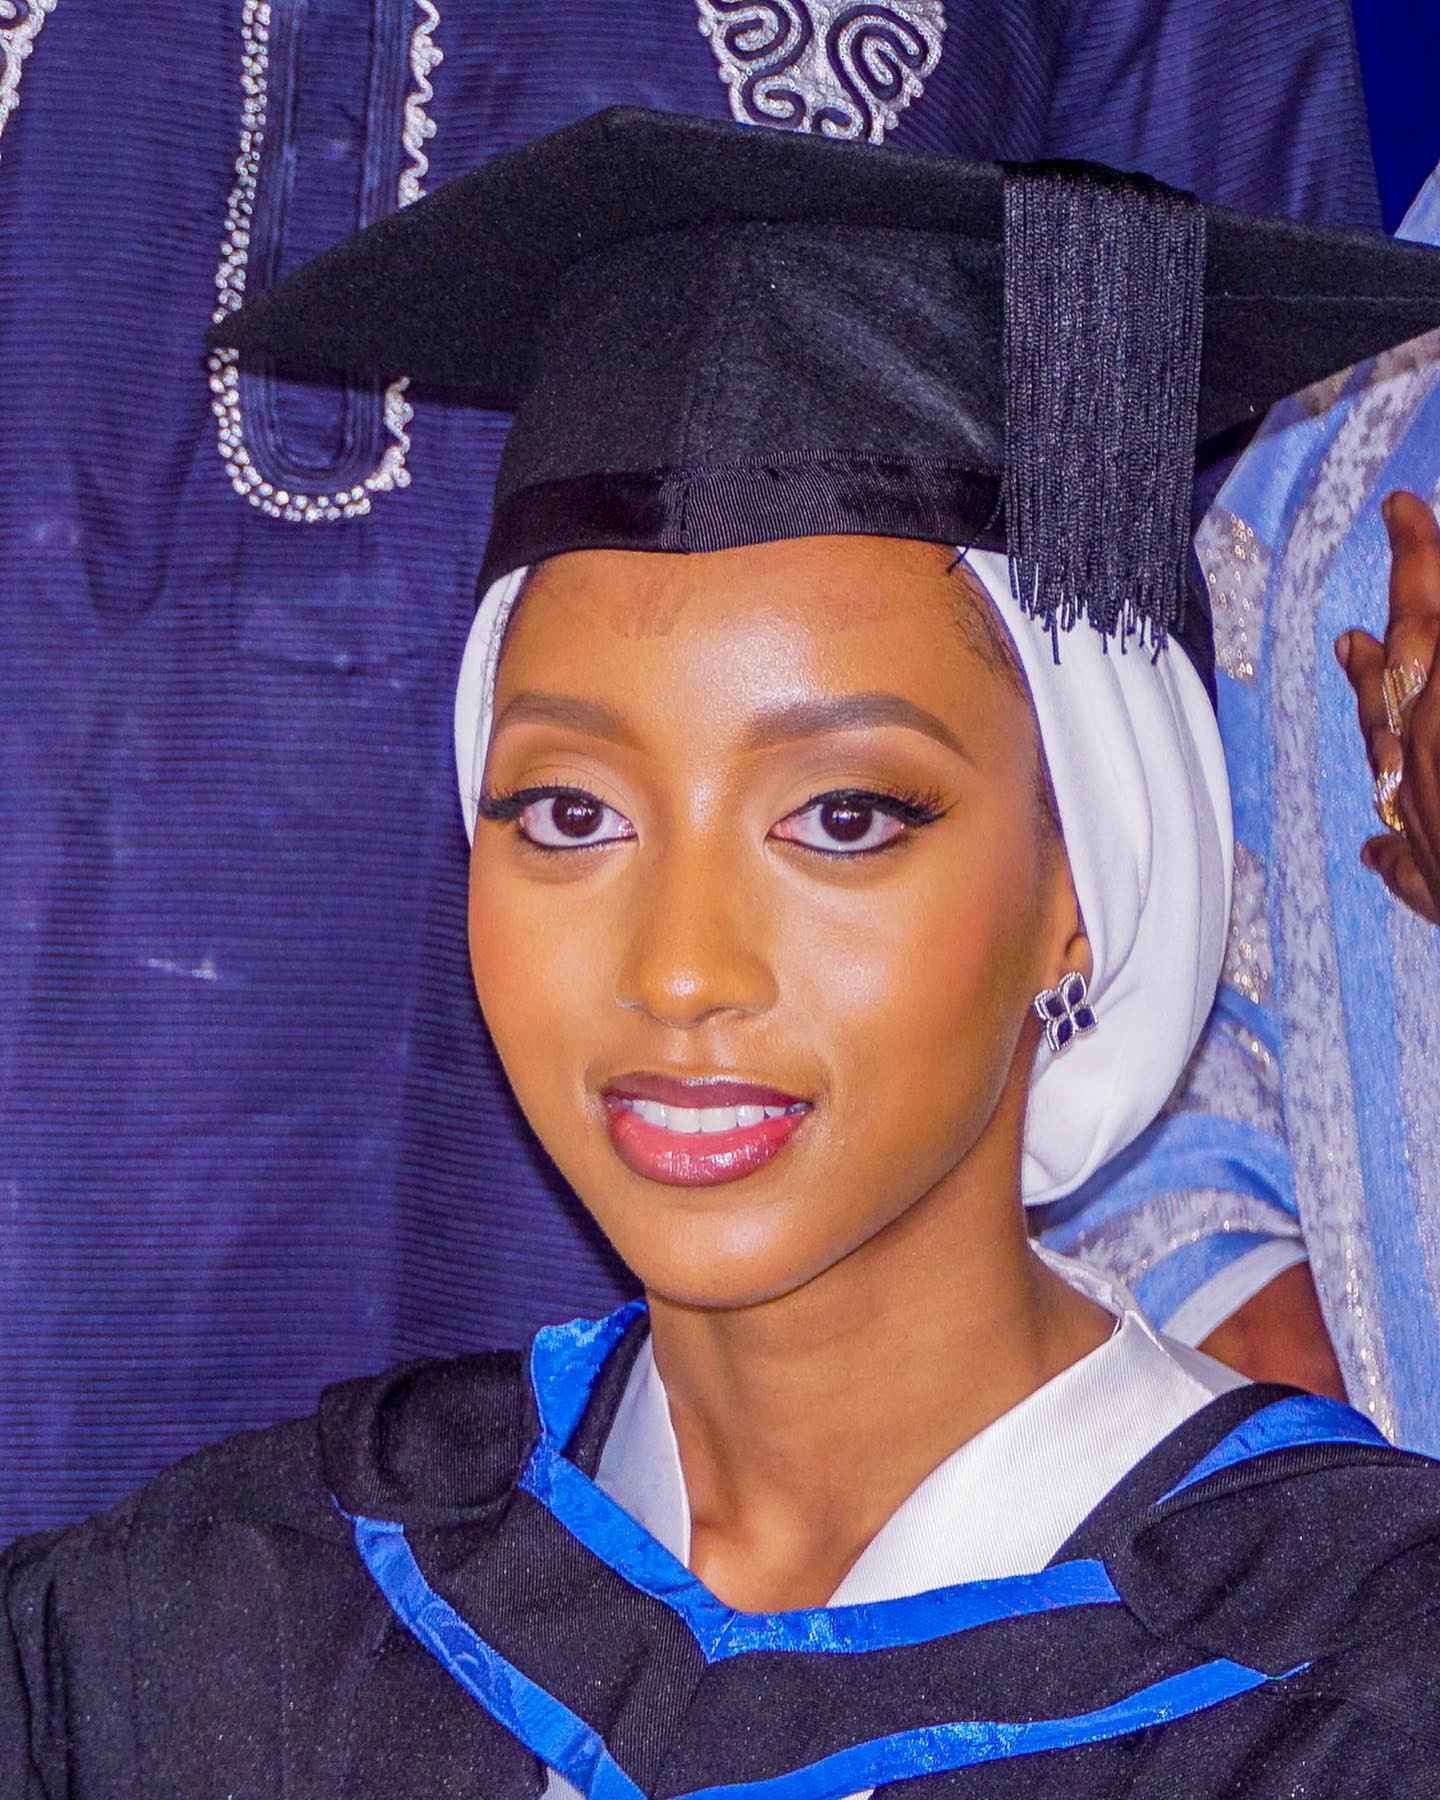 Yusuf-Buharis-Wife-Zahra-Bags-First-Class-in-Architectural-Science-From-a-UK-University-tsbnews.com65